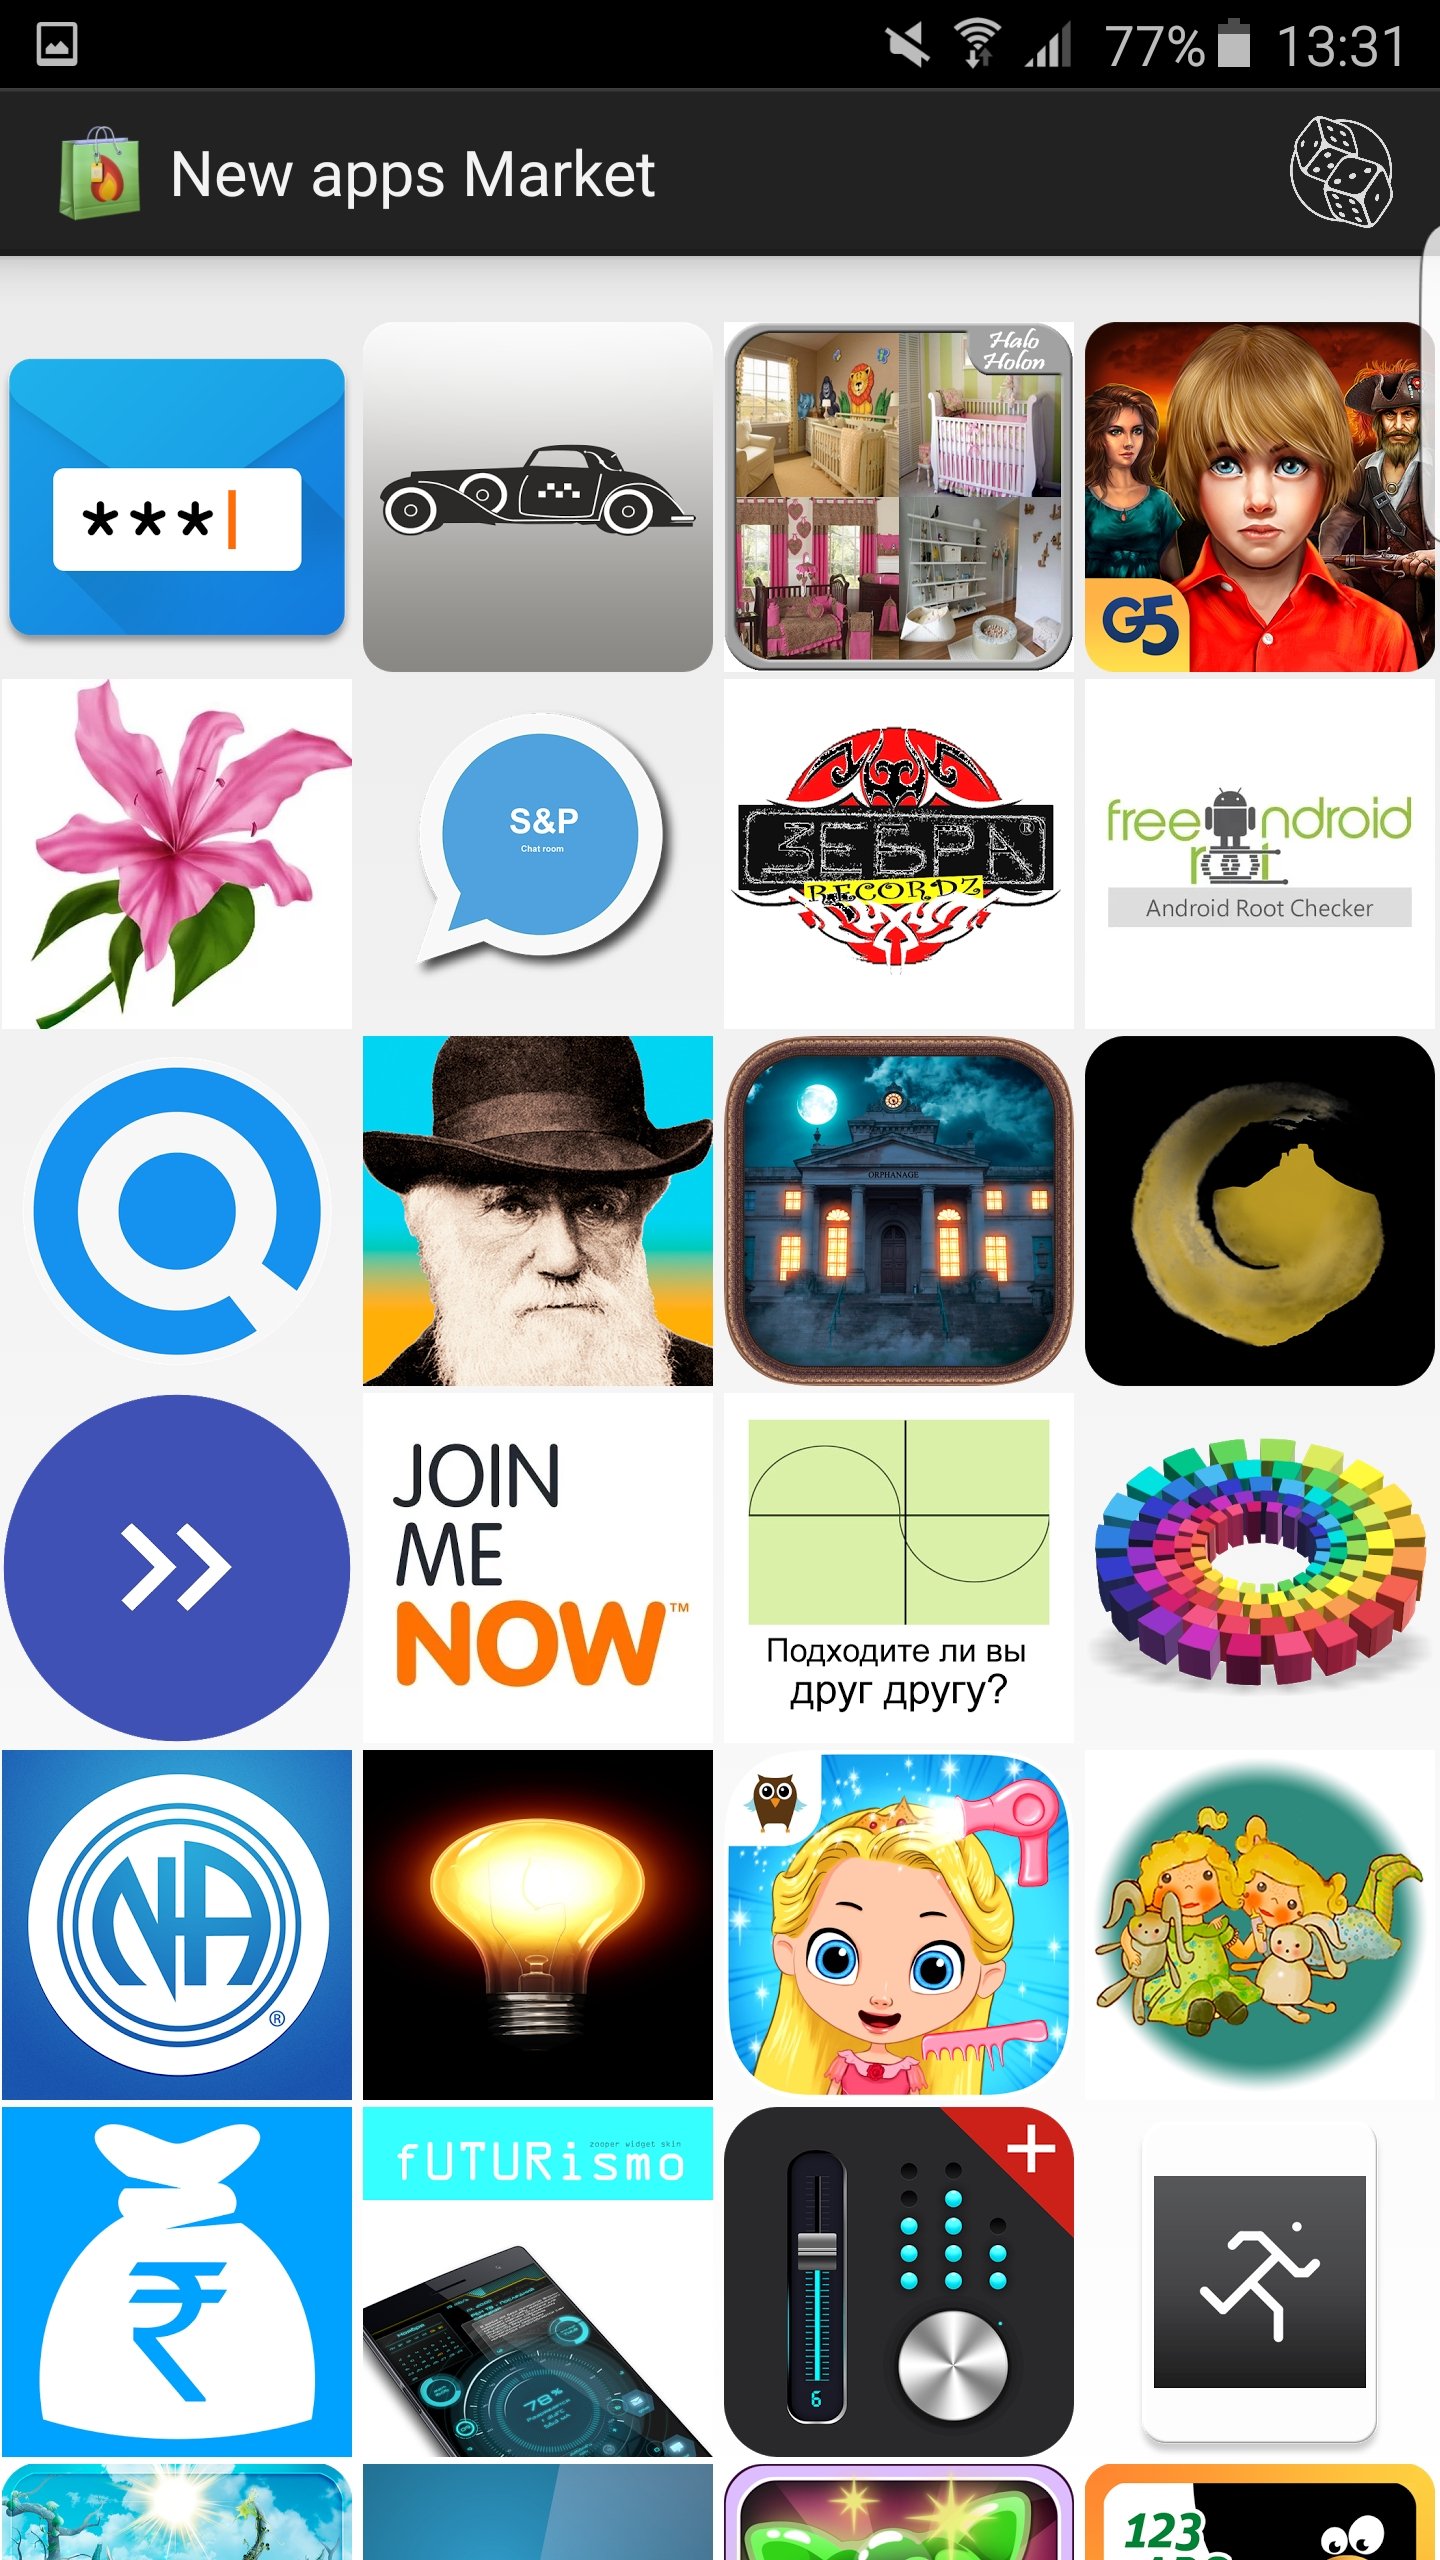 New apps Market 1.0.0 - Download for Android APK Free